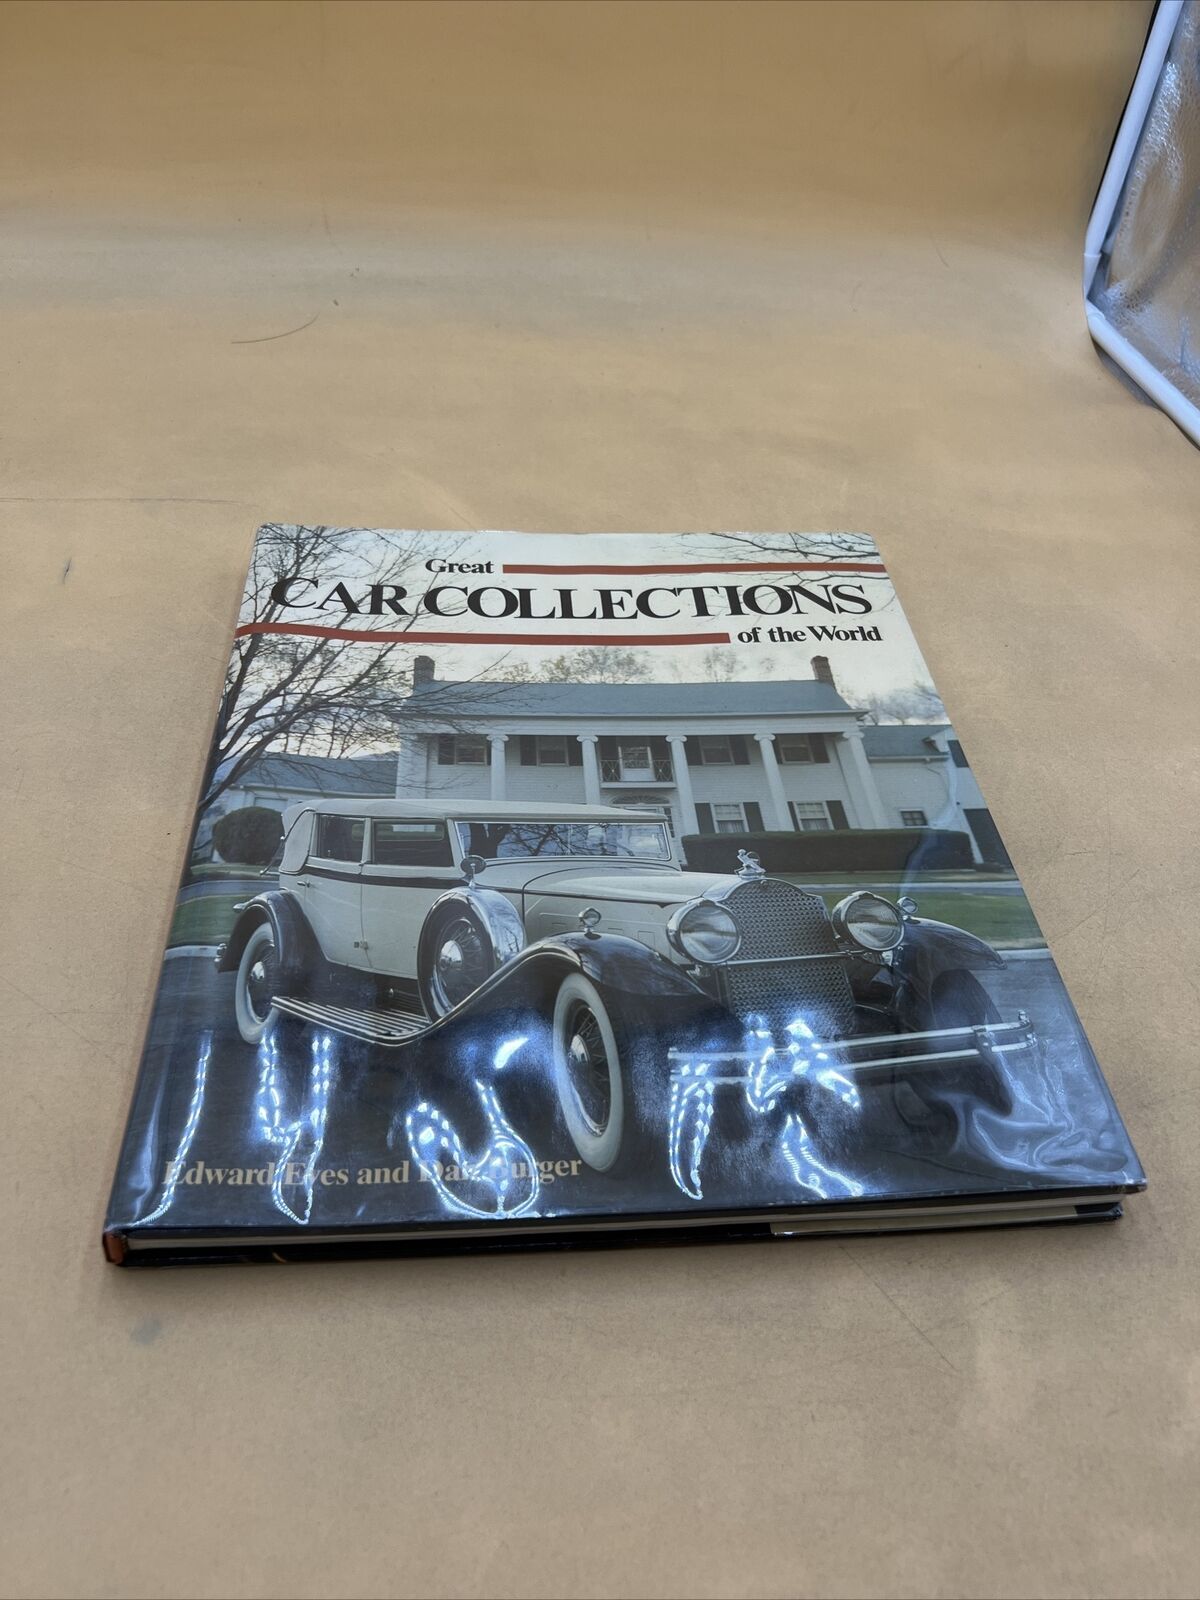 GREAT CAR COLLECTIONS OF THE WORLD BY EDWARD EVES AND DAN BURGER